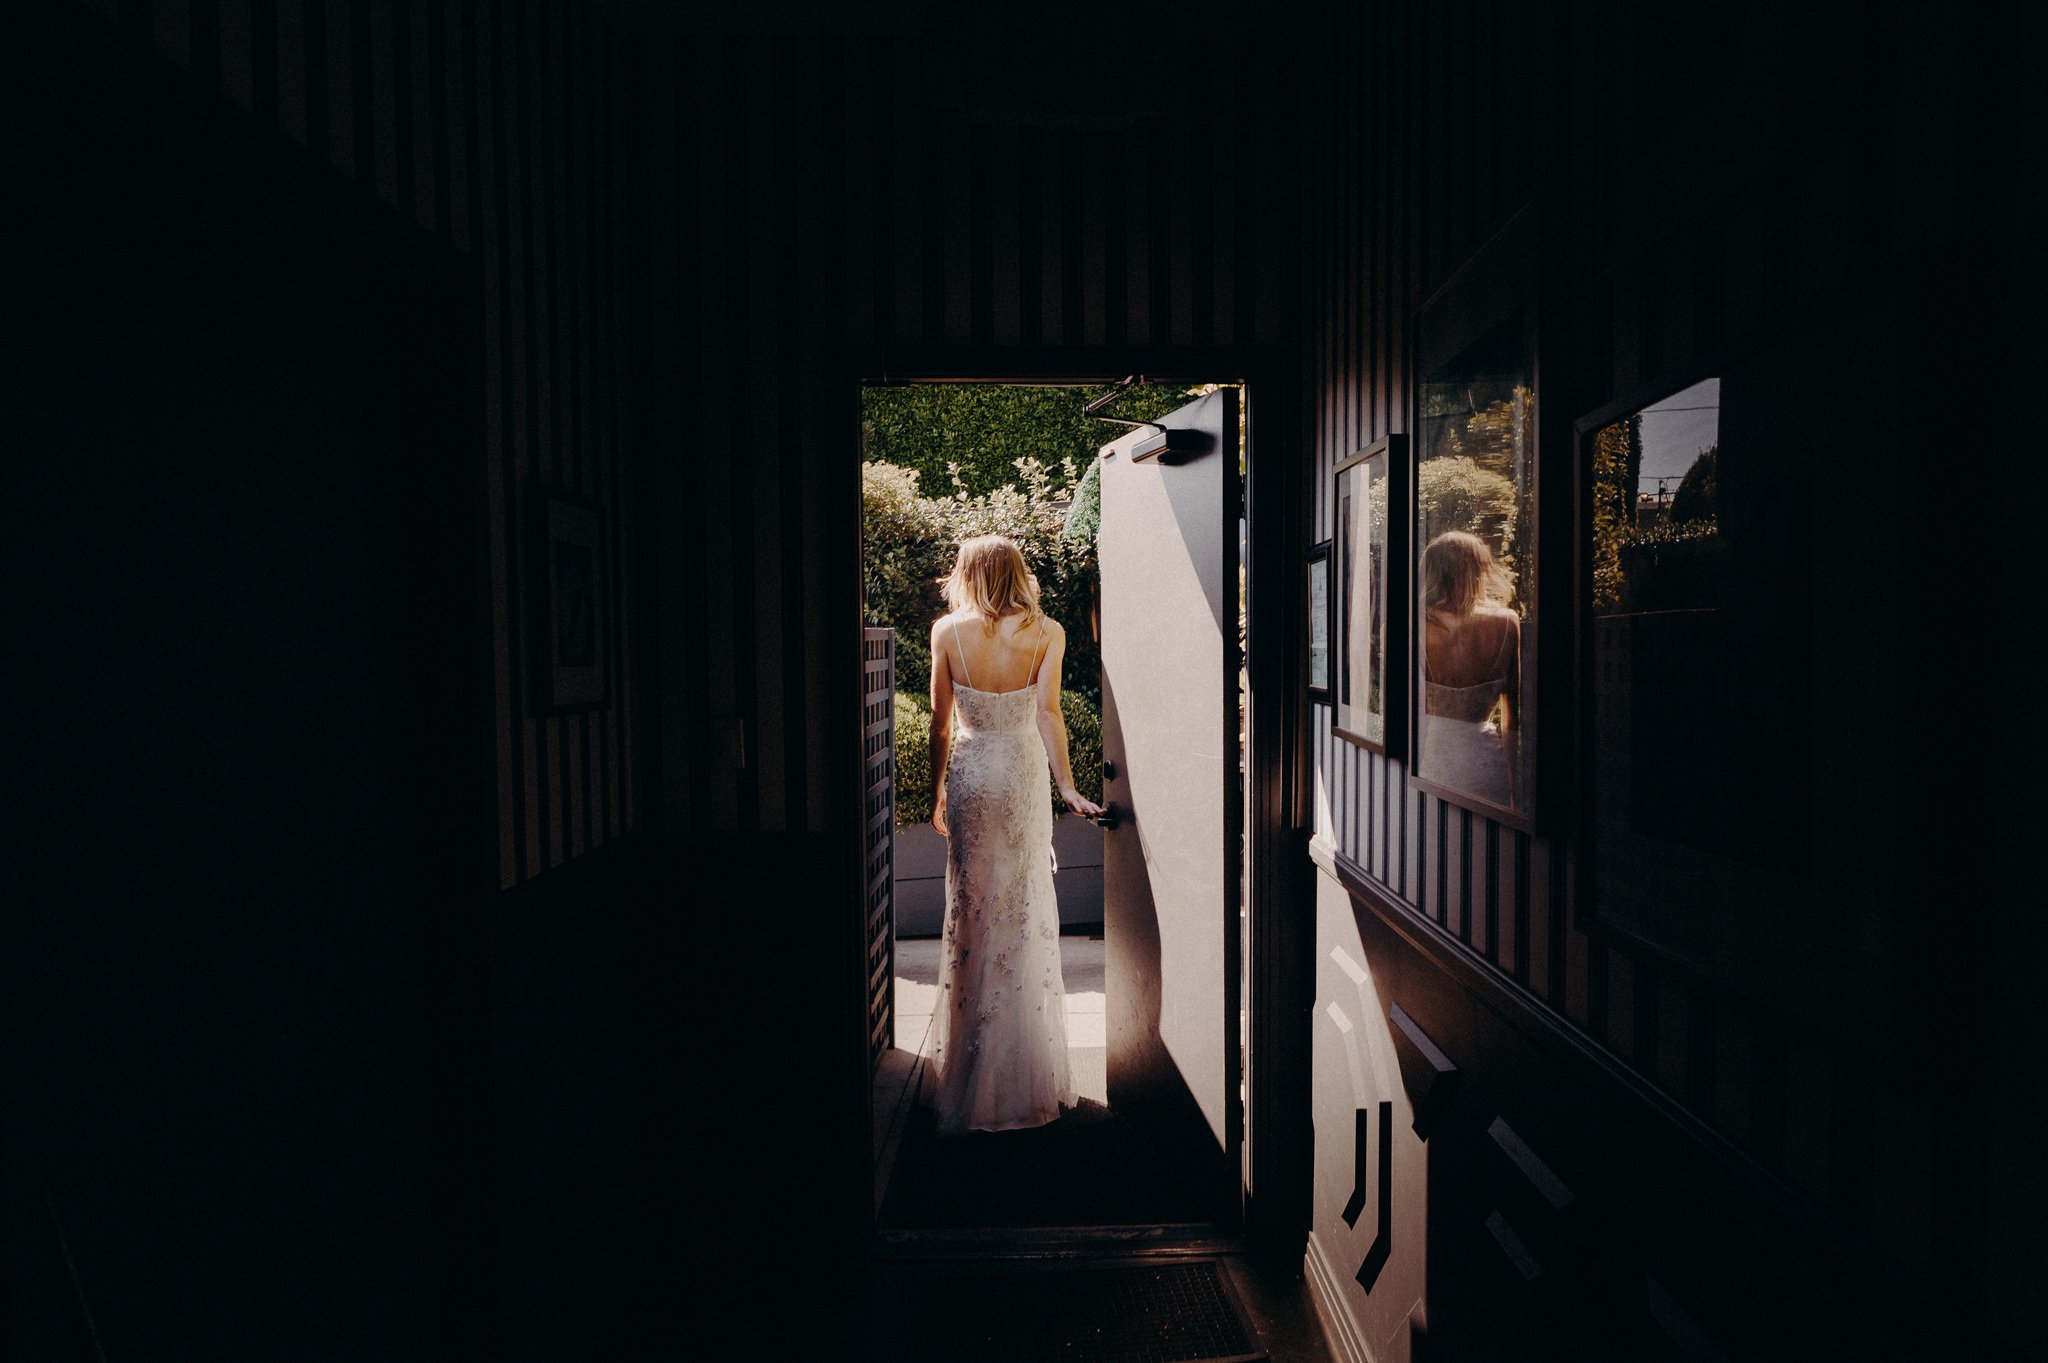 the fig house wedding - queer wedding photographers in los angeles - itlaphoto.com-7.jpg